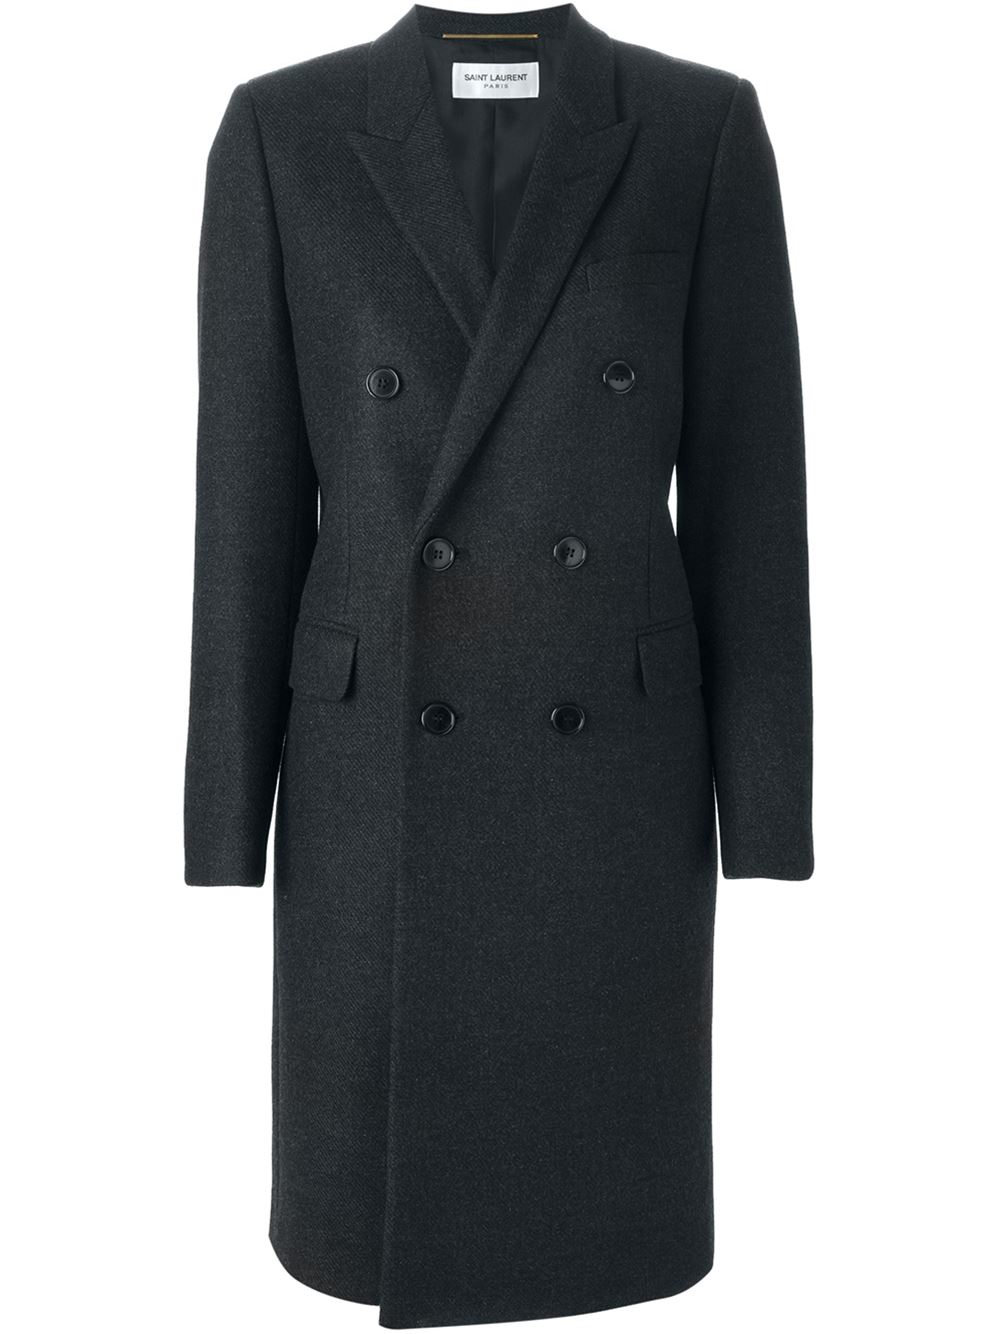 Saint laurent Double Breasted Overcoat in Black | Lyst